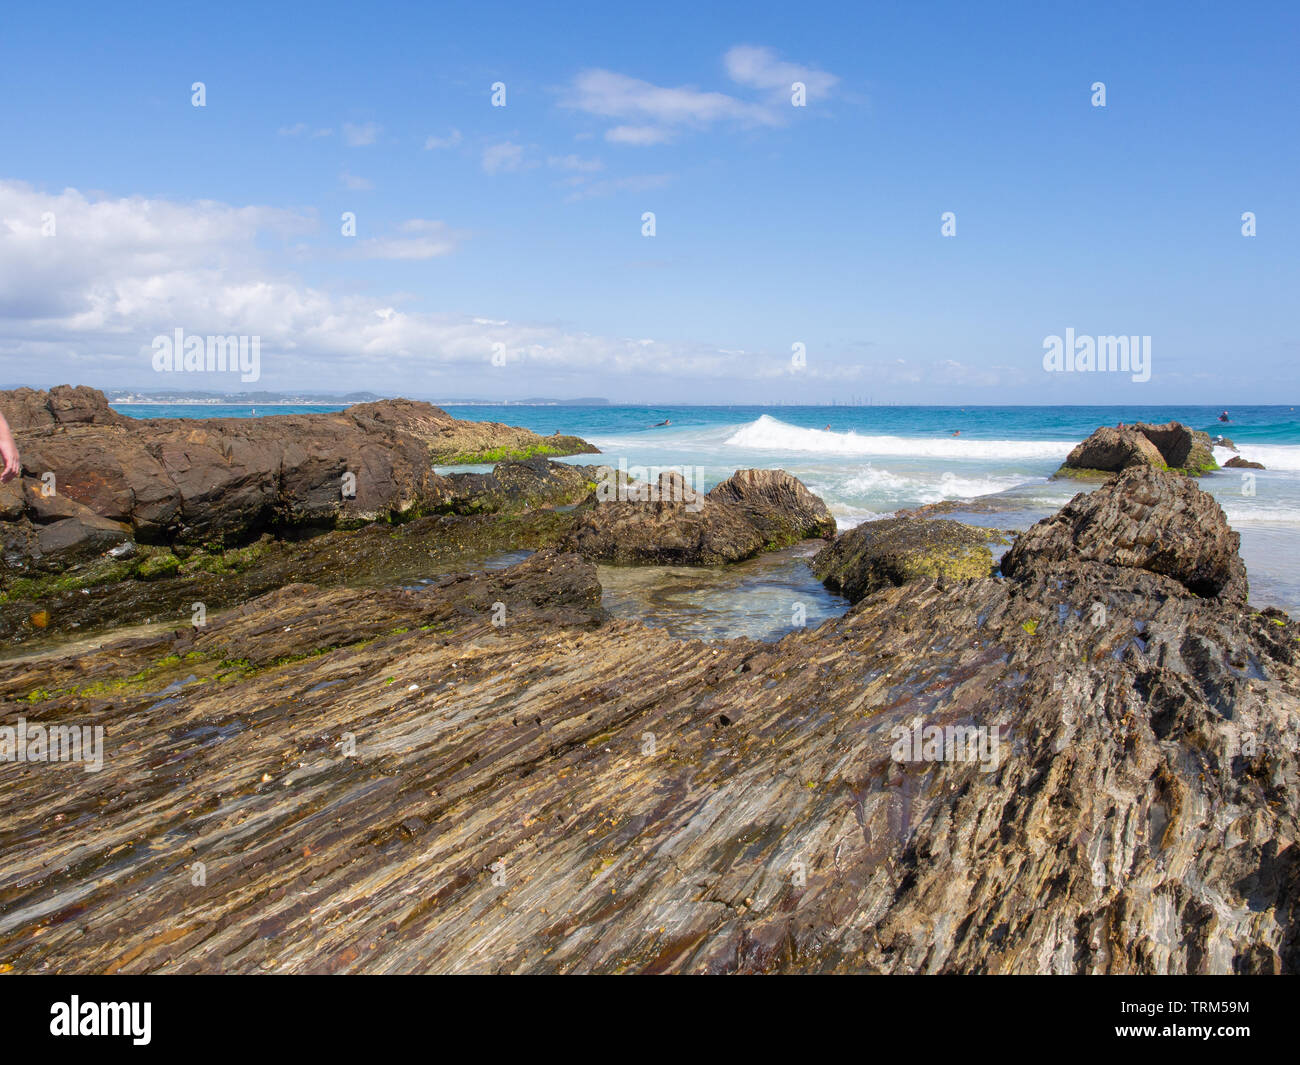 Snapper Rocks At Tweed Heads On The Gold Coast Stock Photo